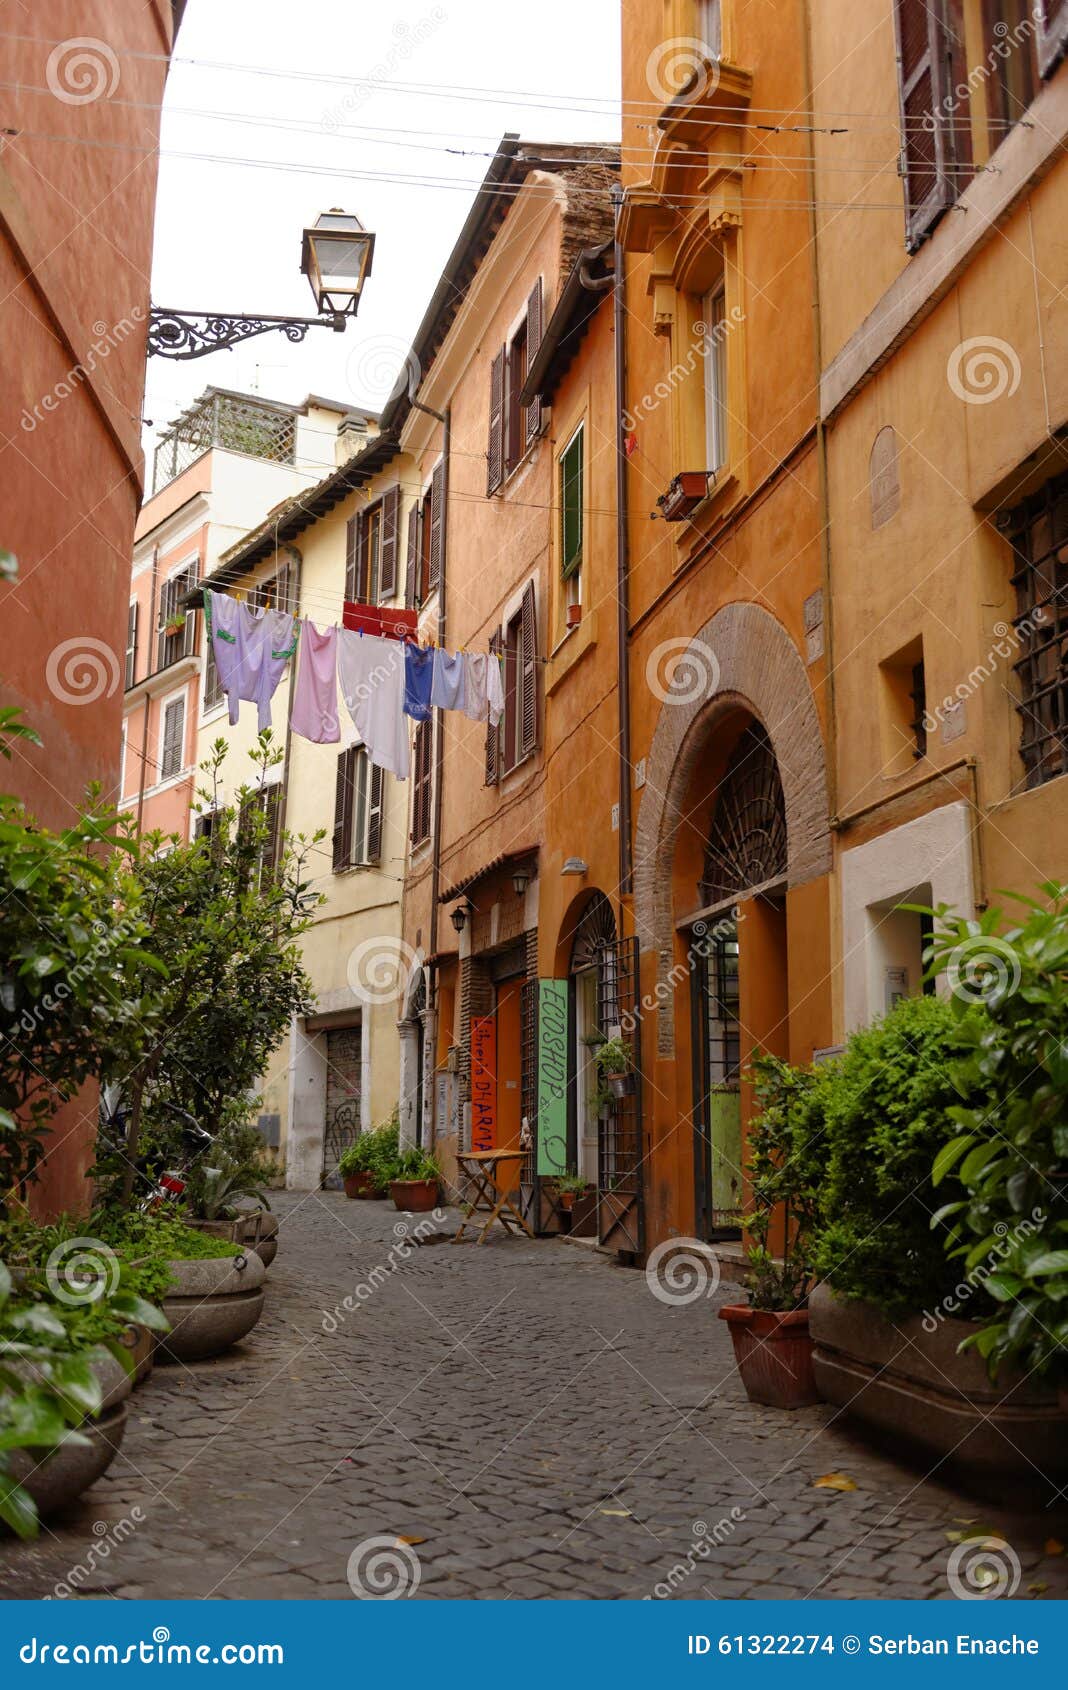 alleyway in rome, italy